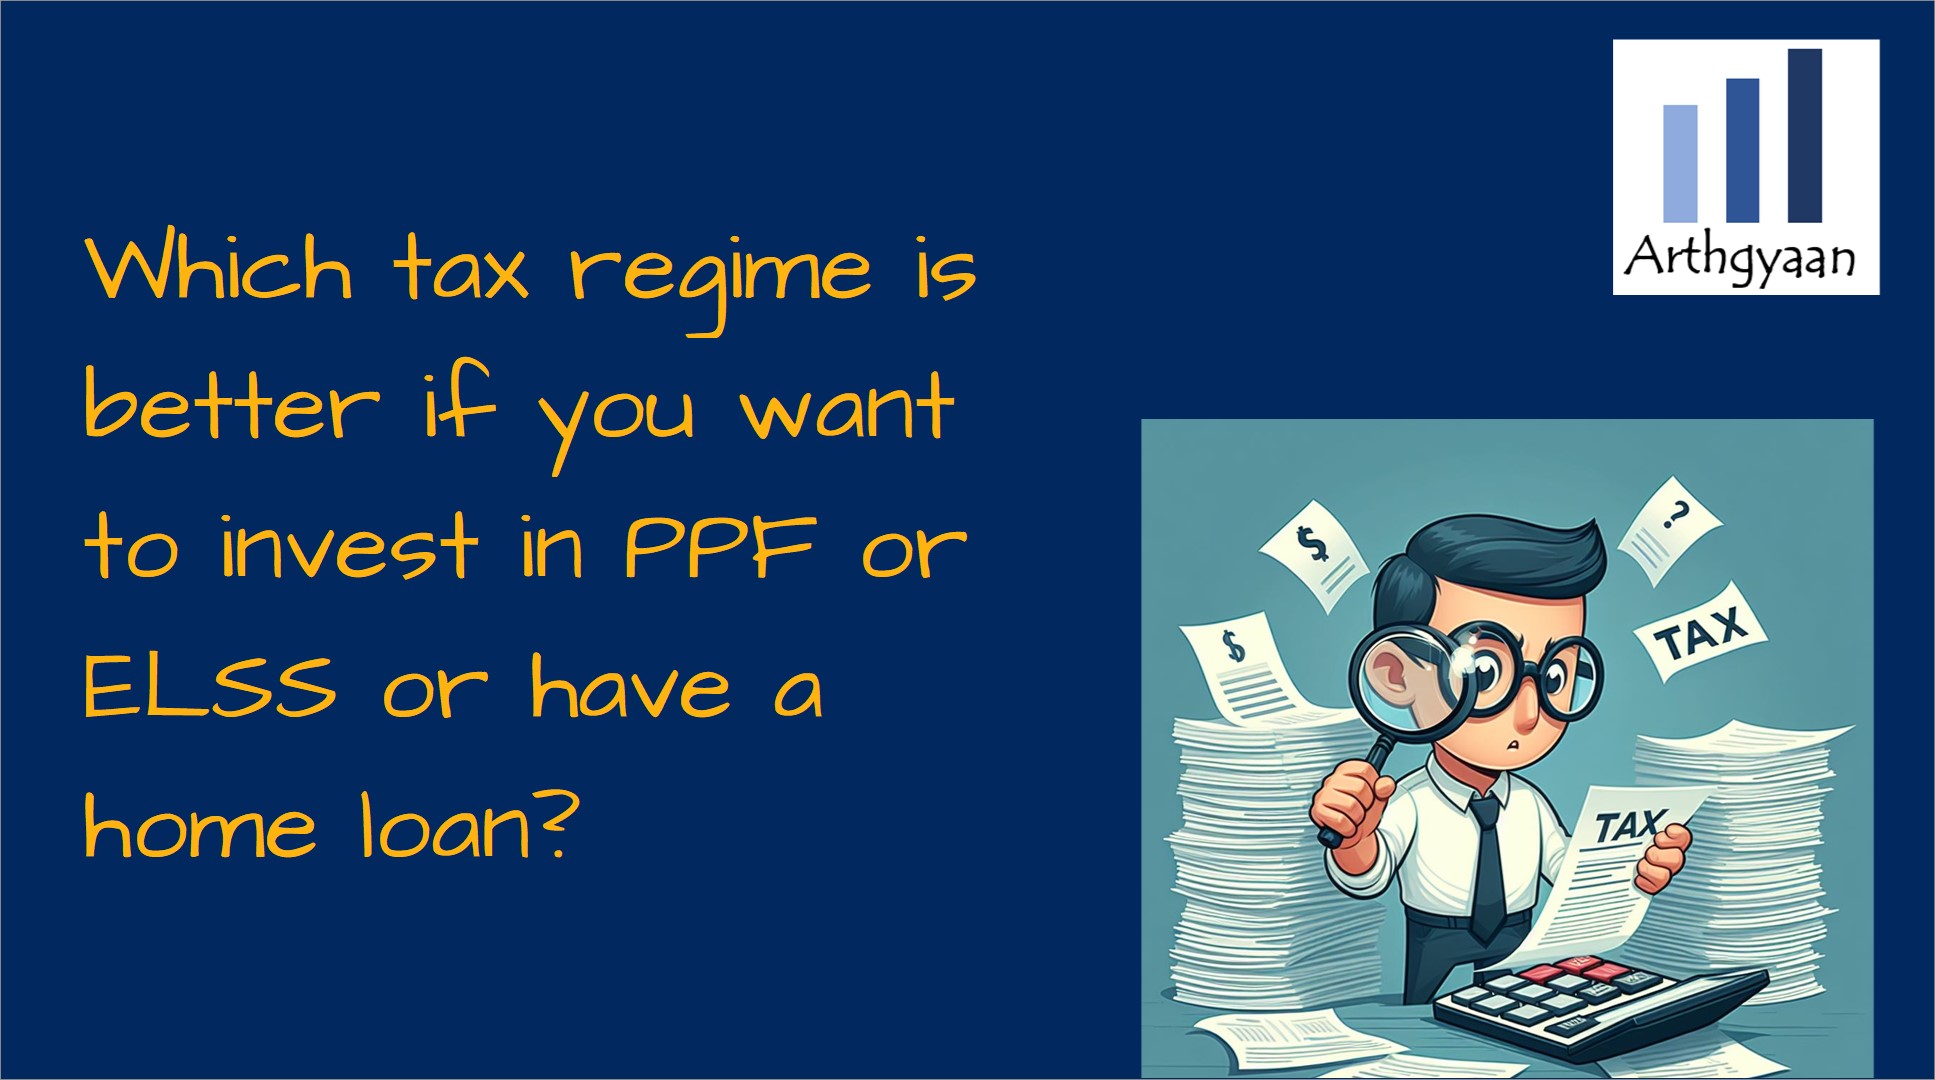 Which tax regime is better if you want to invest in PPF or ELSS or have a home loan?